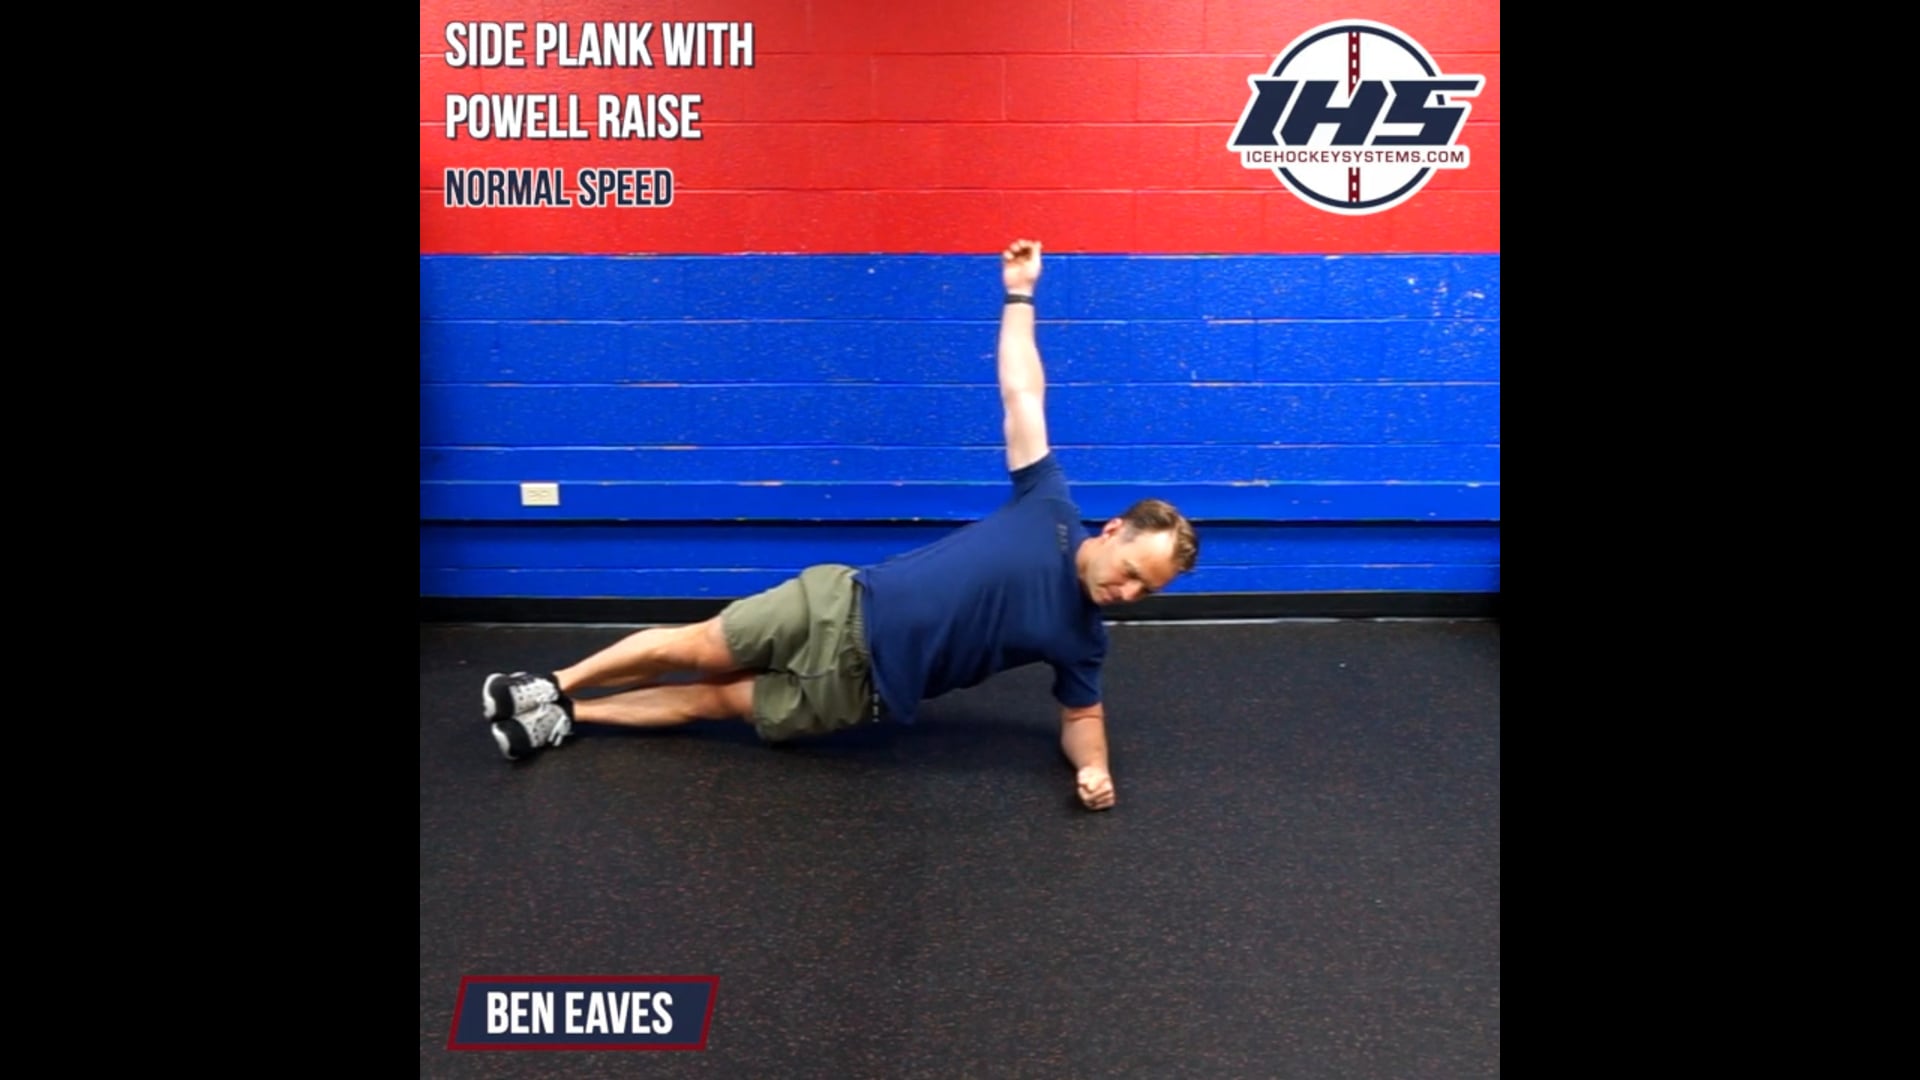 Side Plank With Powell Raise